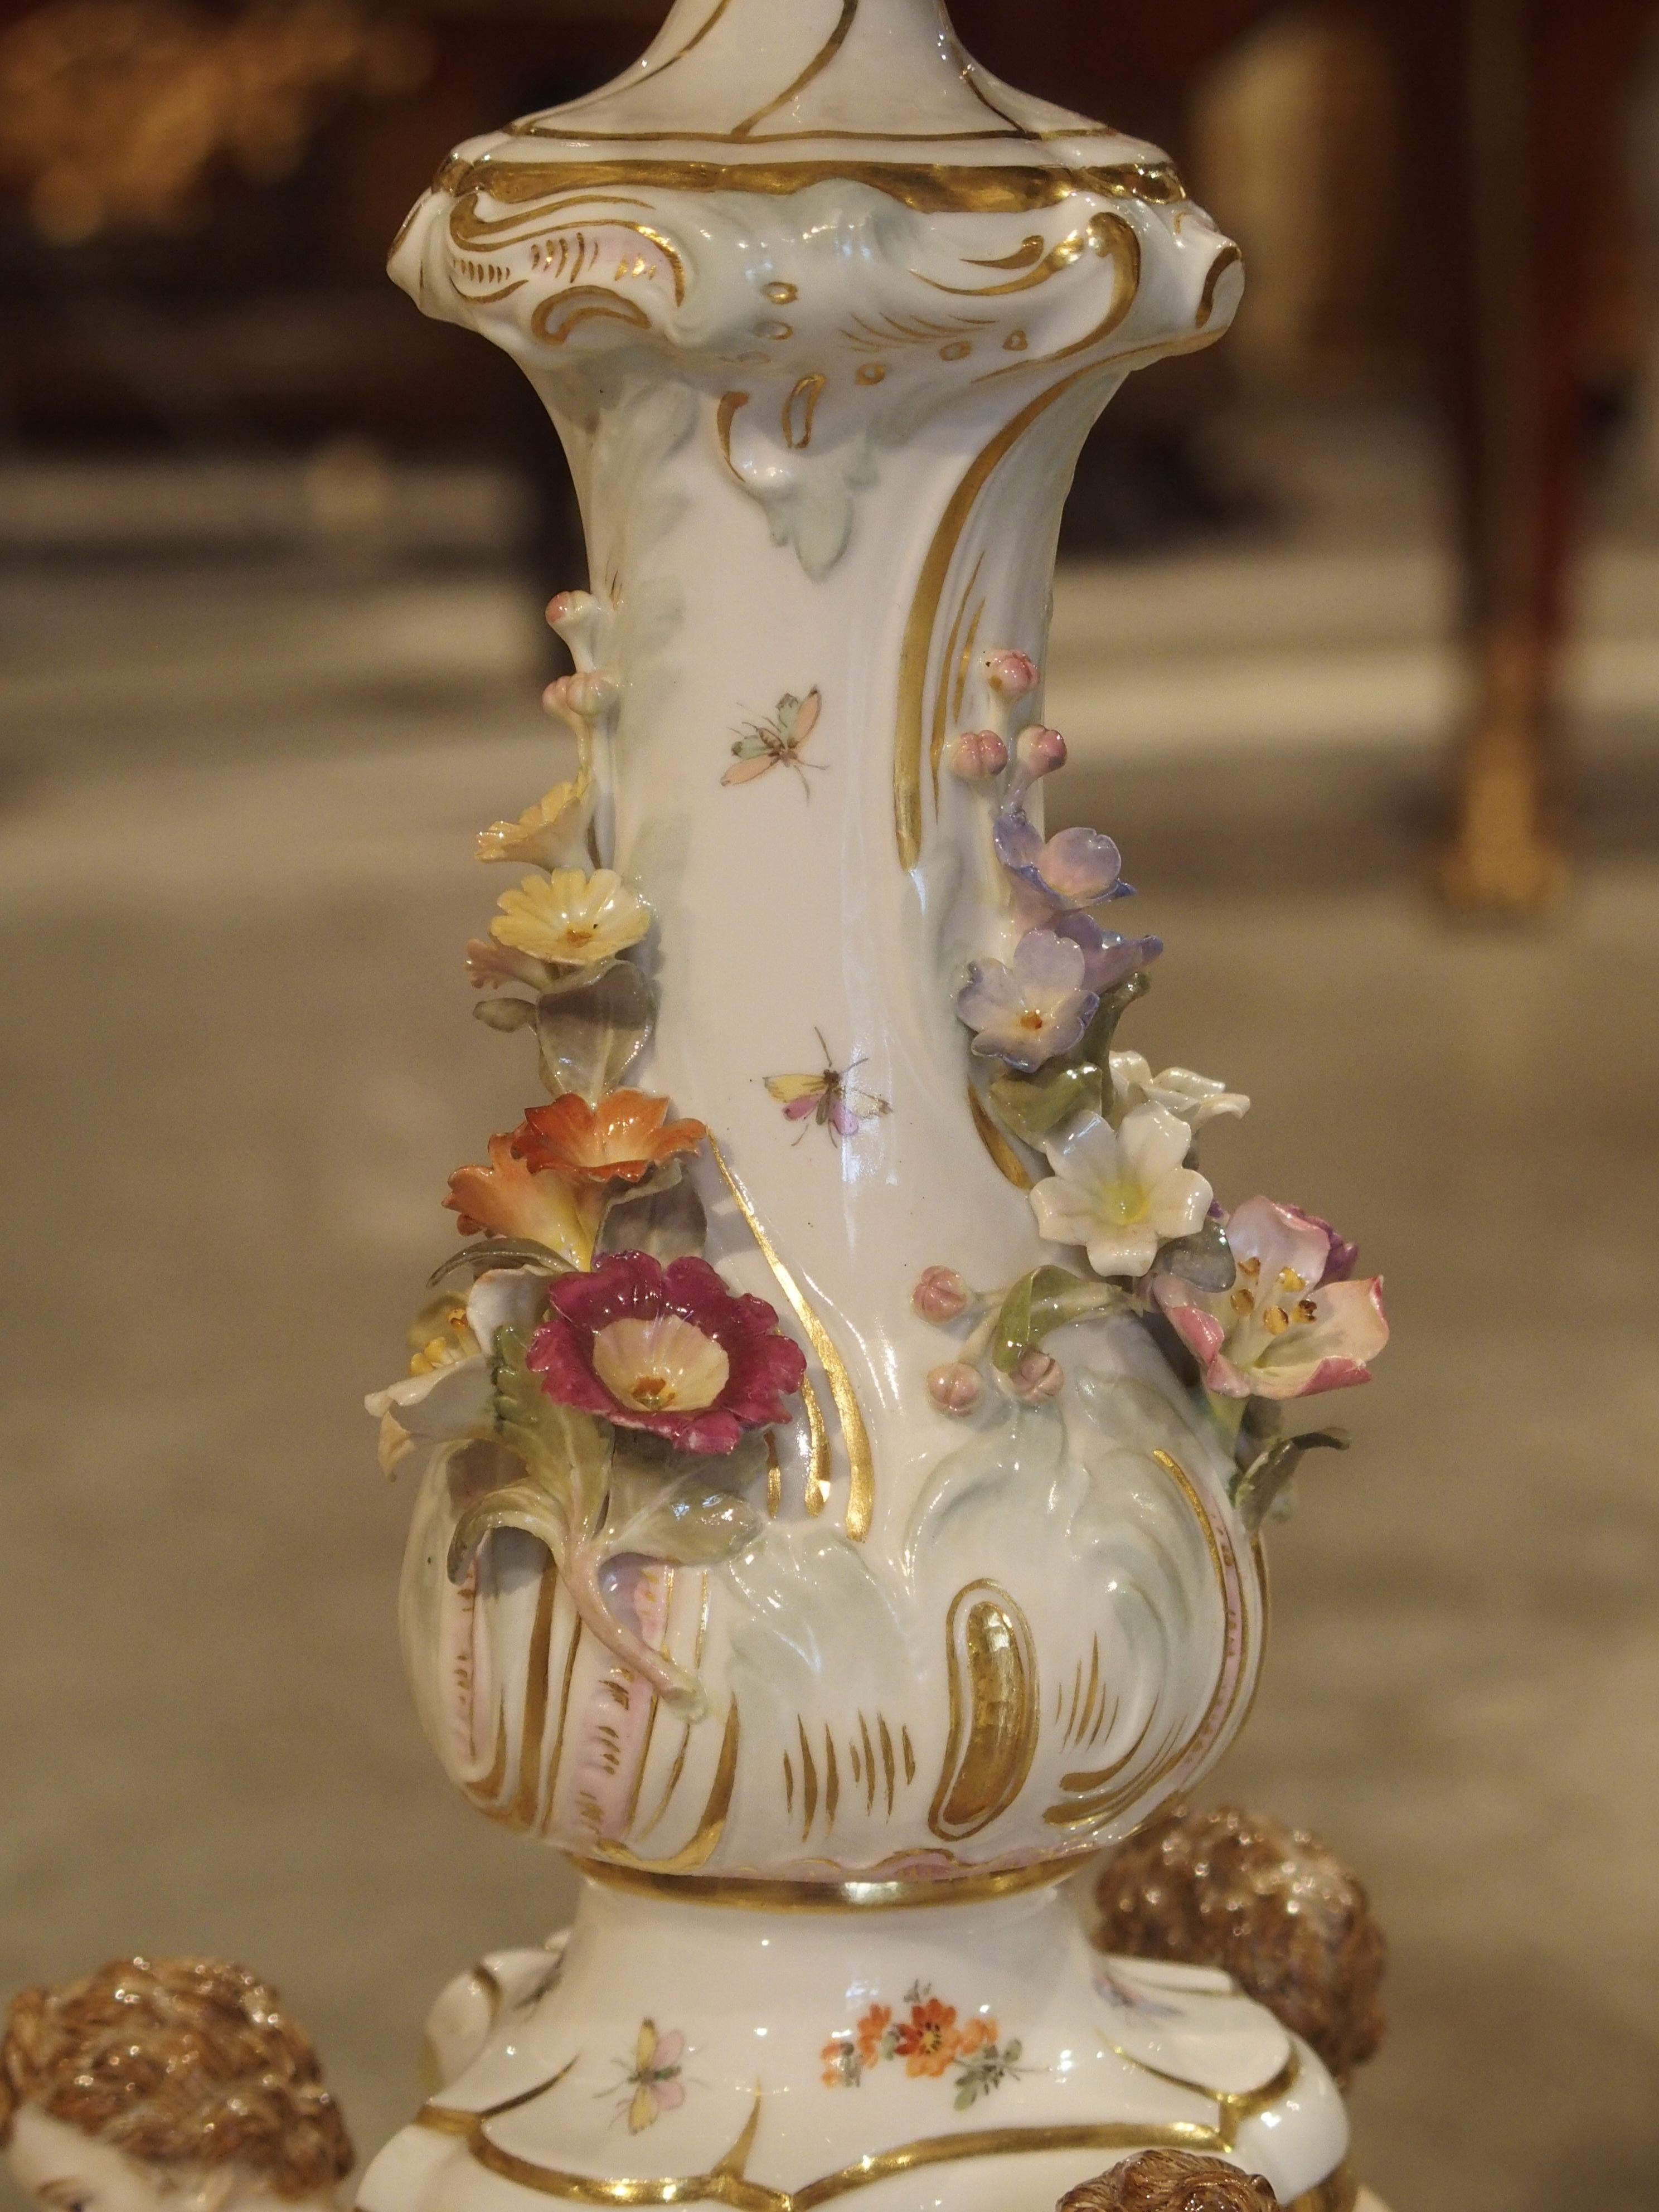 This elegant pair of colorful German Meissen, seven-arm candelabras dates to the early 1900s. The gros relief intricacy and thinness of the porcelain flower heads, leaves and fruit is absolutely astounding. There are flat paintings of ladybugs,